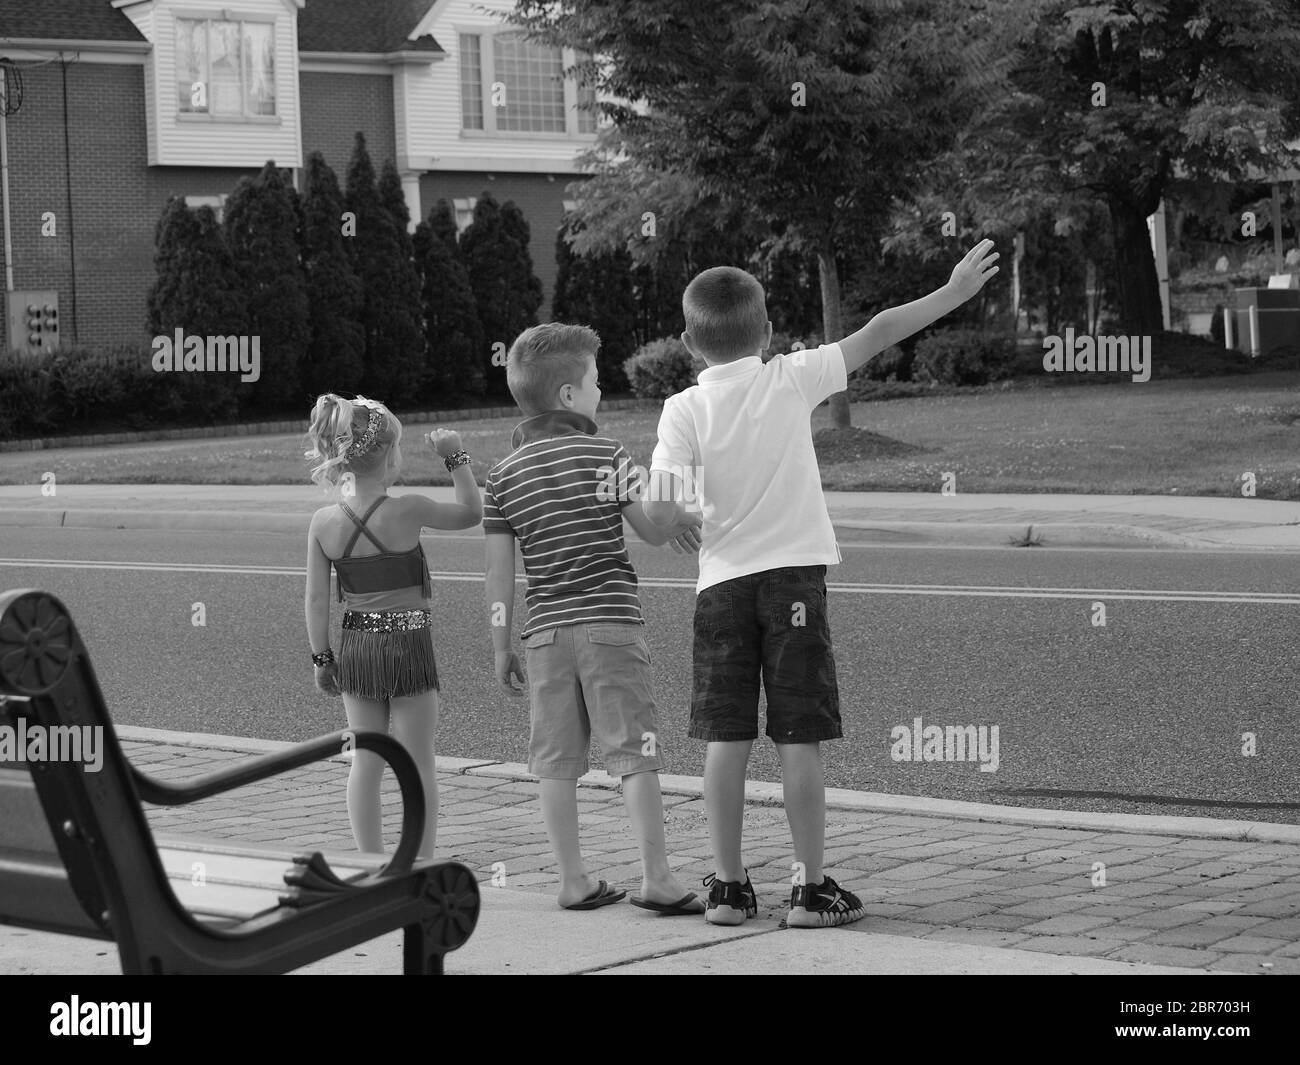 Three children trying to wave at passersby along a street in their hometown. In black and white shows a simpler fun time. Stock Photo